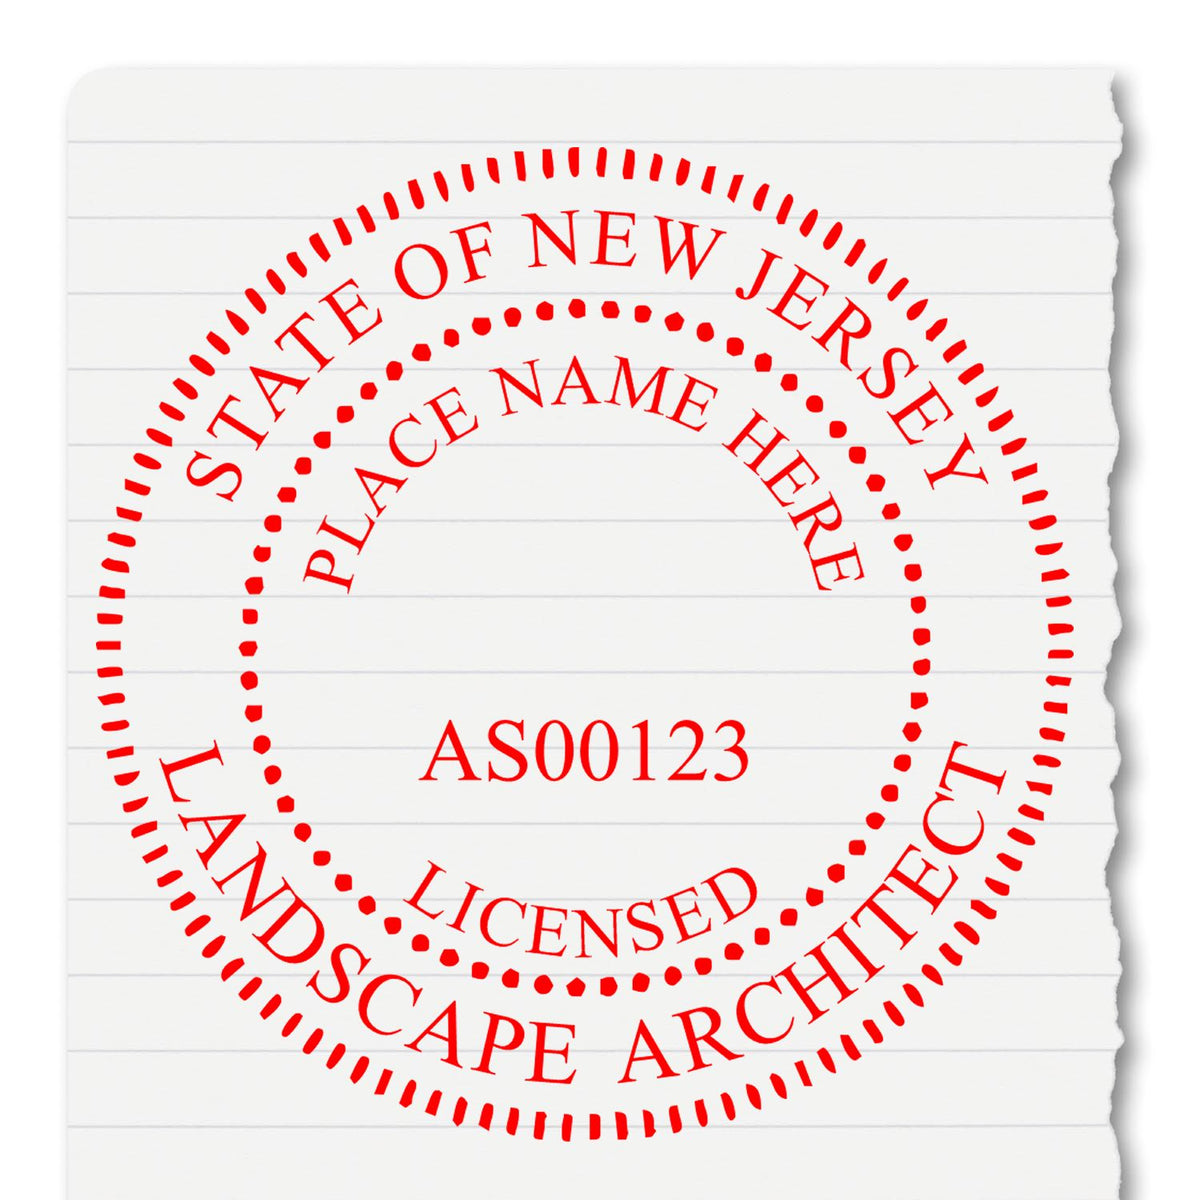 A photograph of the Digital New Jersey Landscape Architect Stamp stamp impression reveals a vivid, professional image of the on paper.